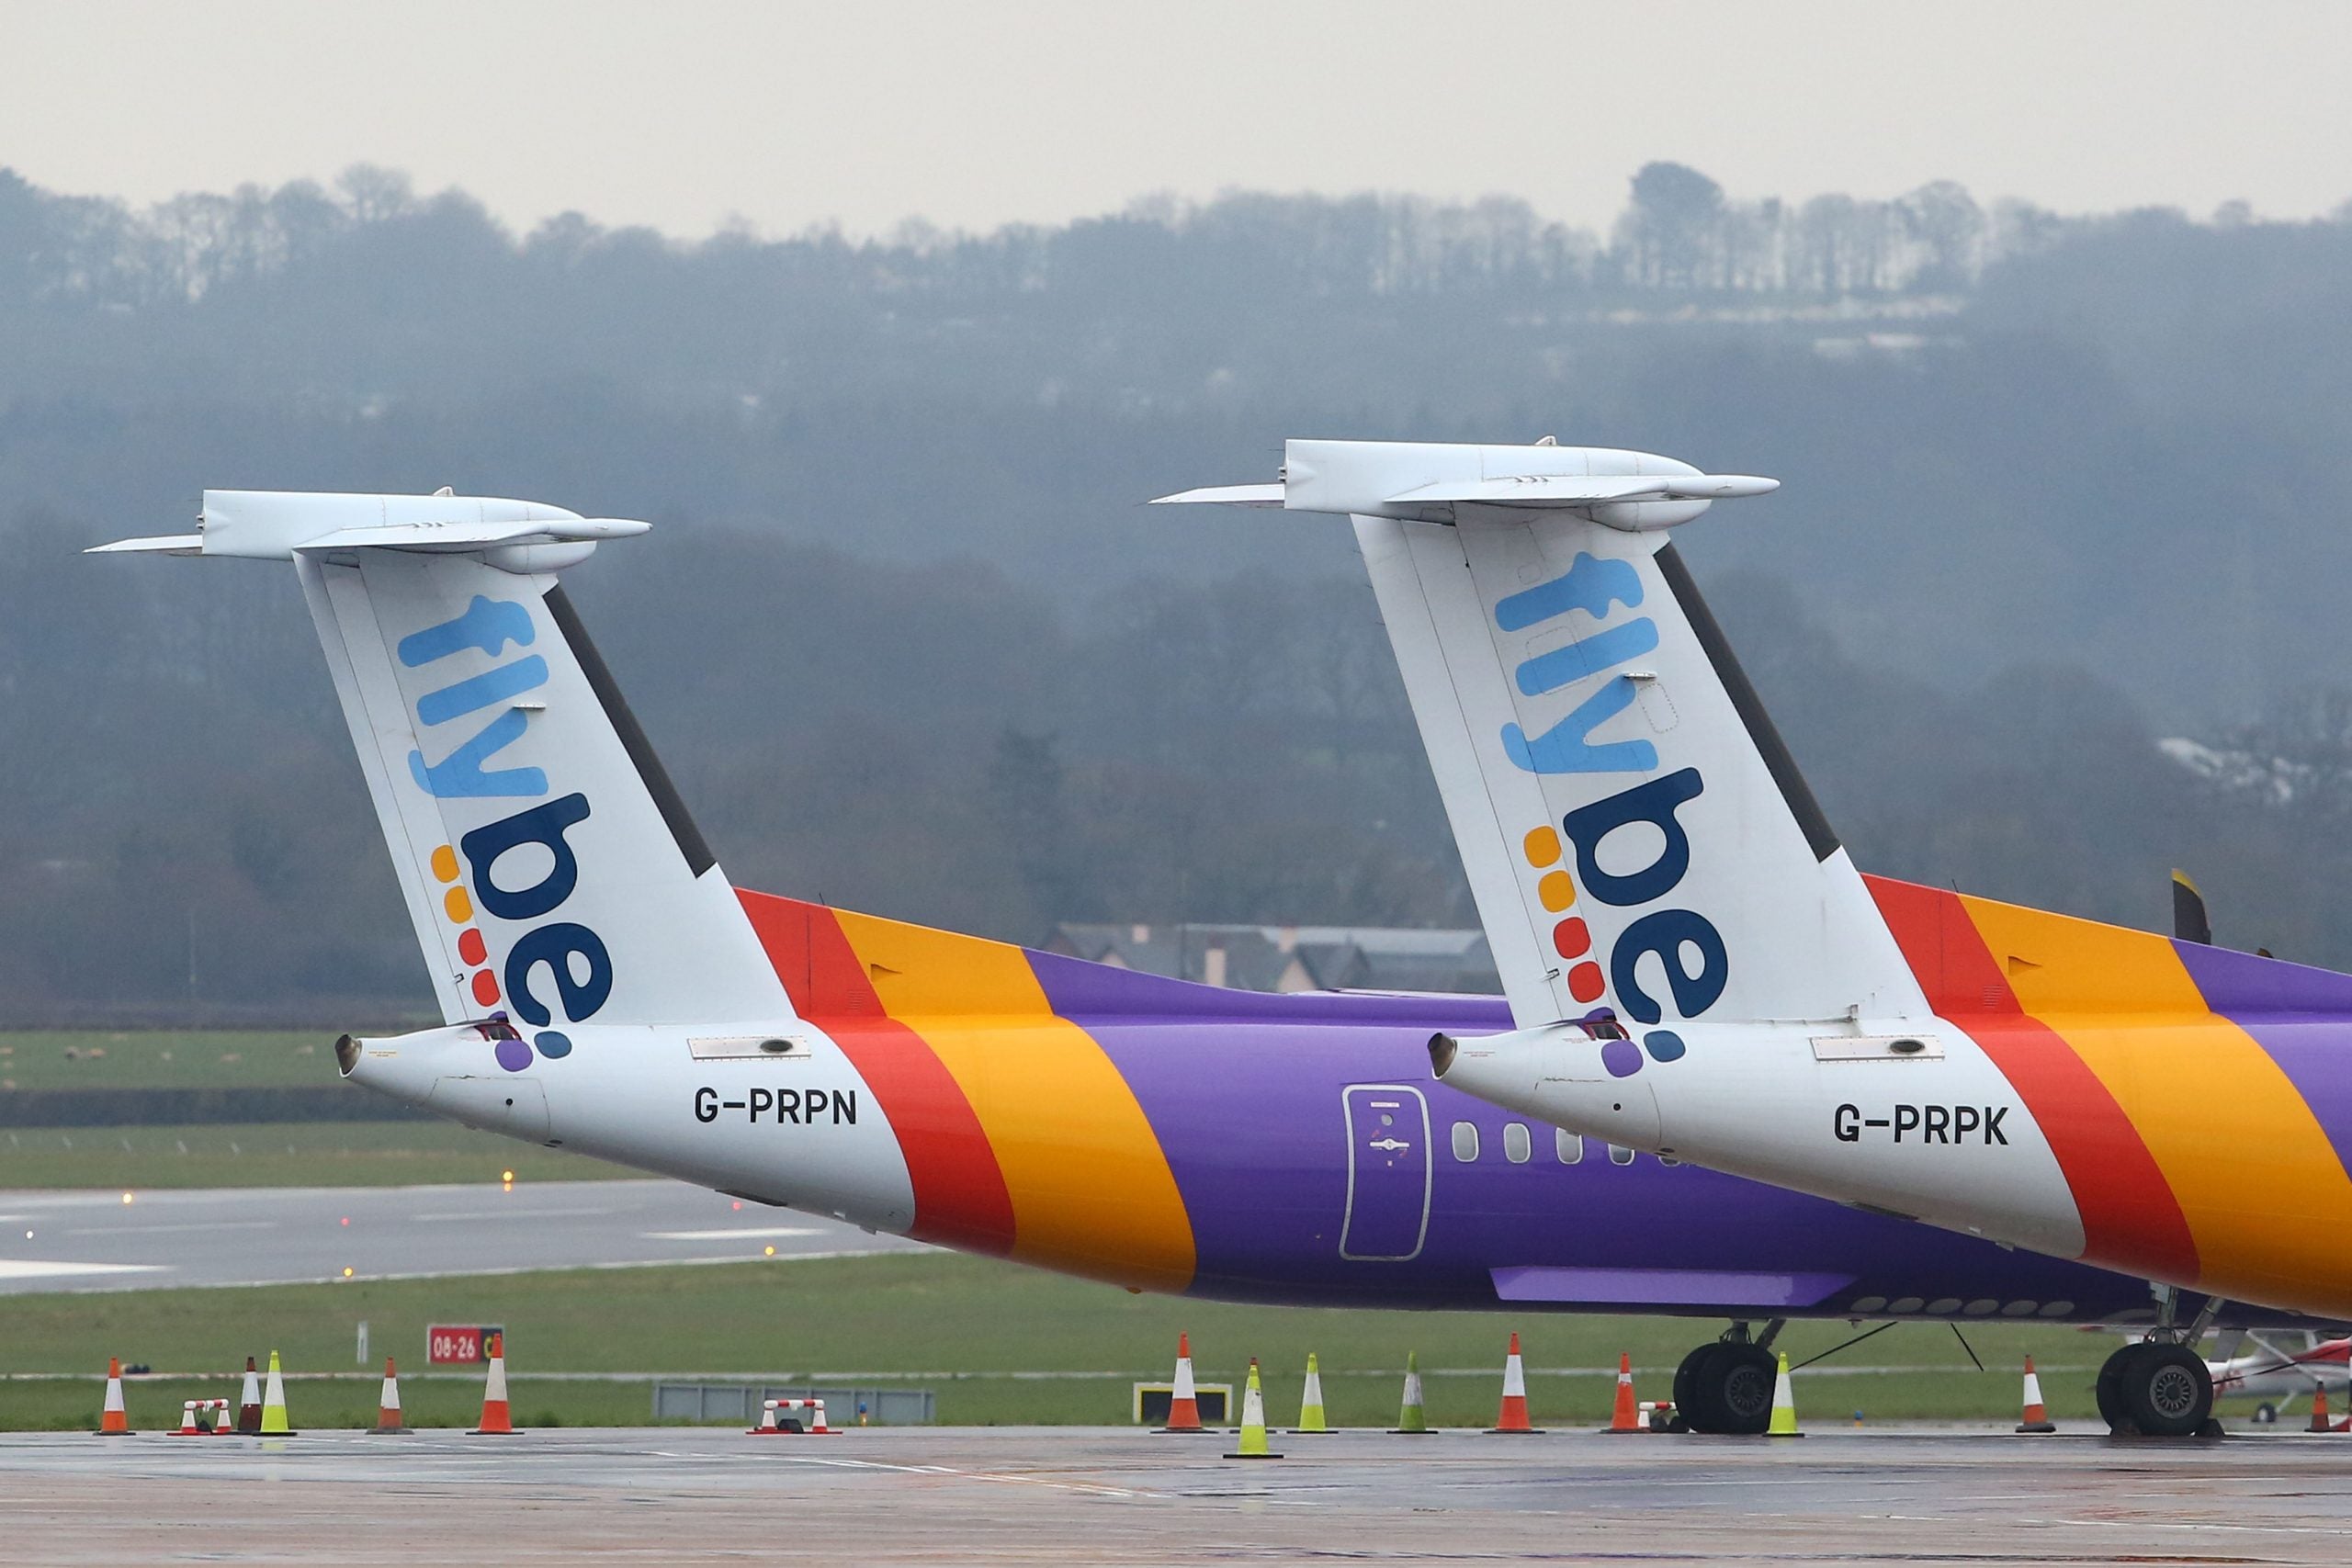 Can Flybe customers get their money back now the airline has collapsed? - The Points Guy UK